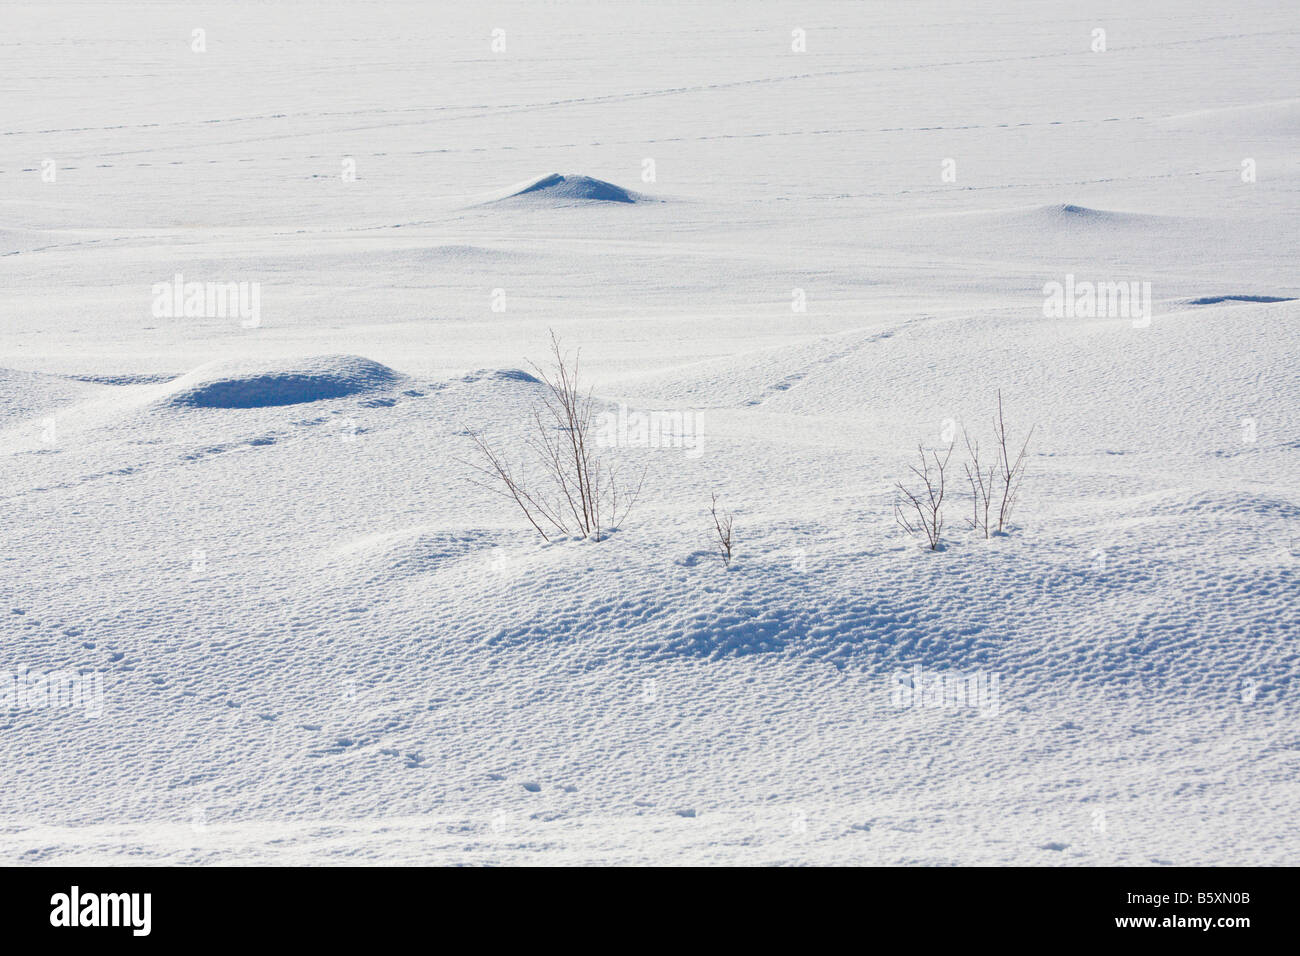 Snow covered lake and shore with animal tracks Valdres Norway Stock Photo